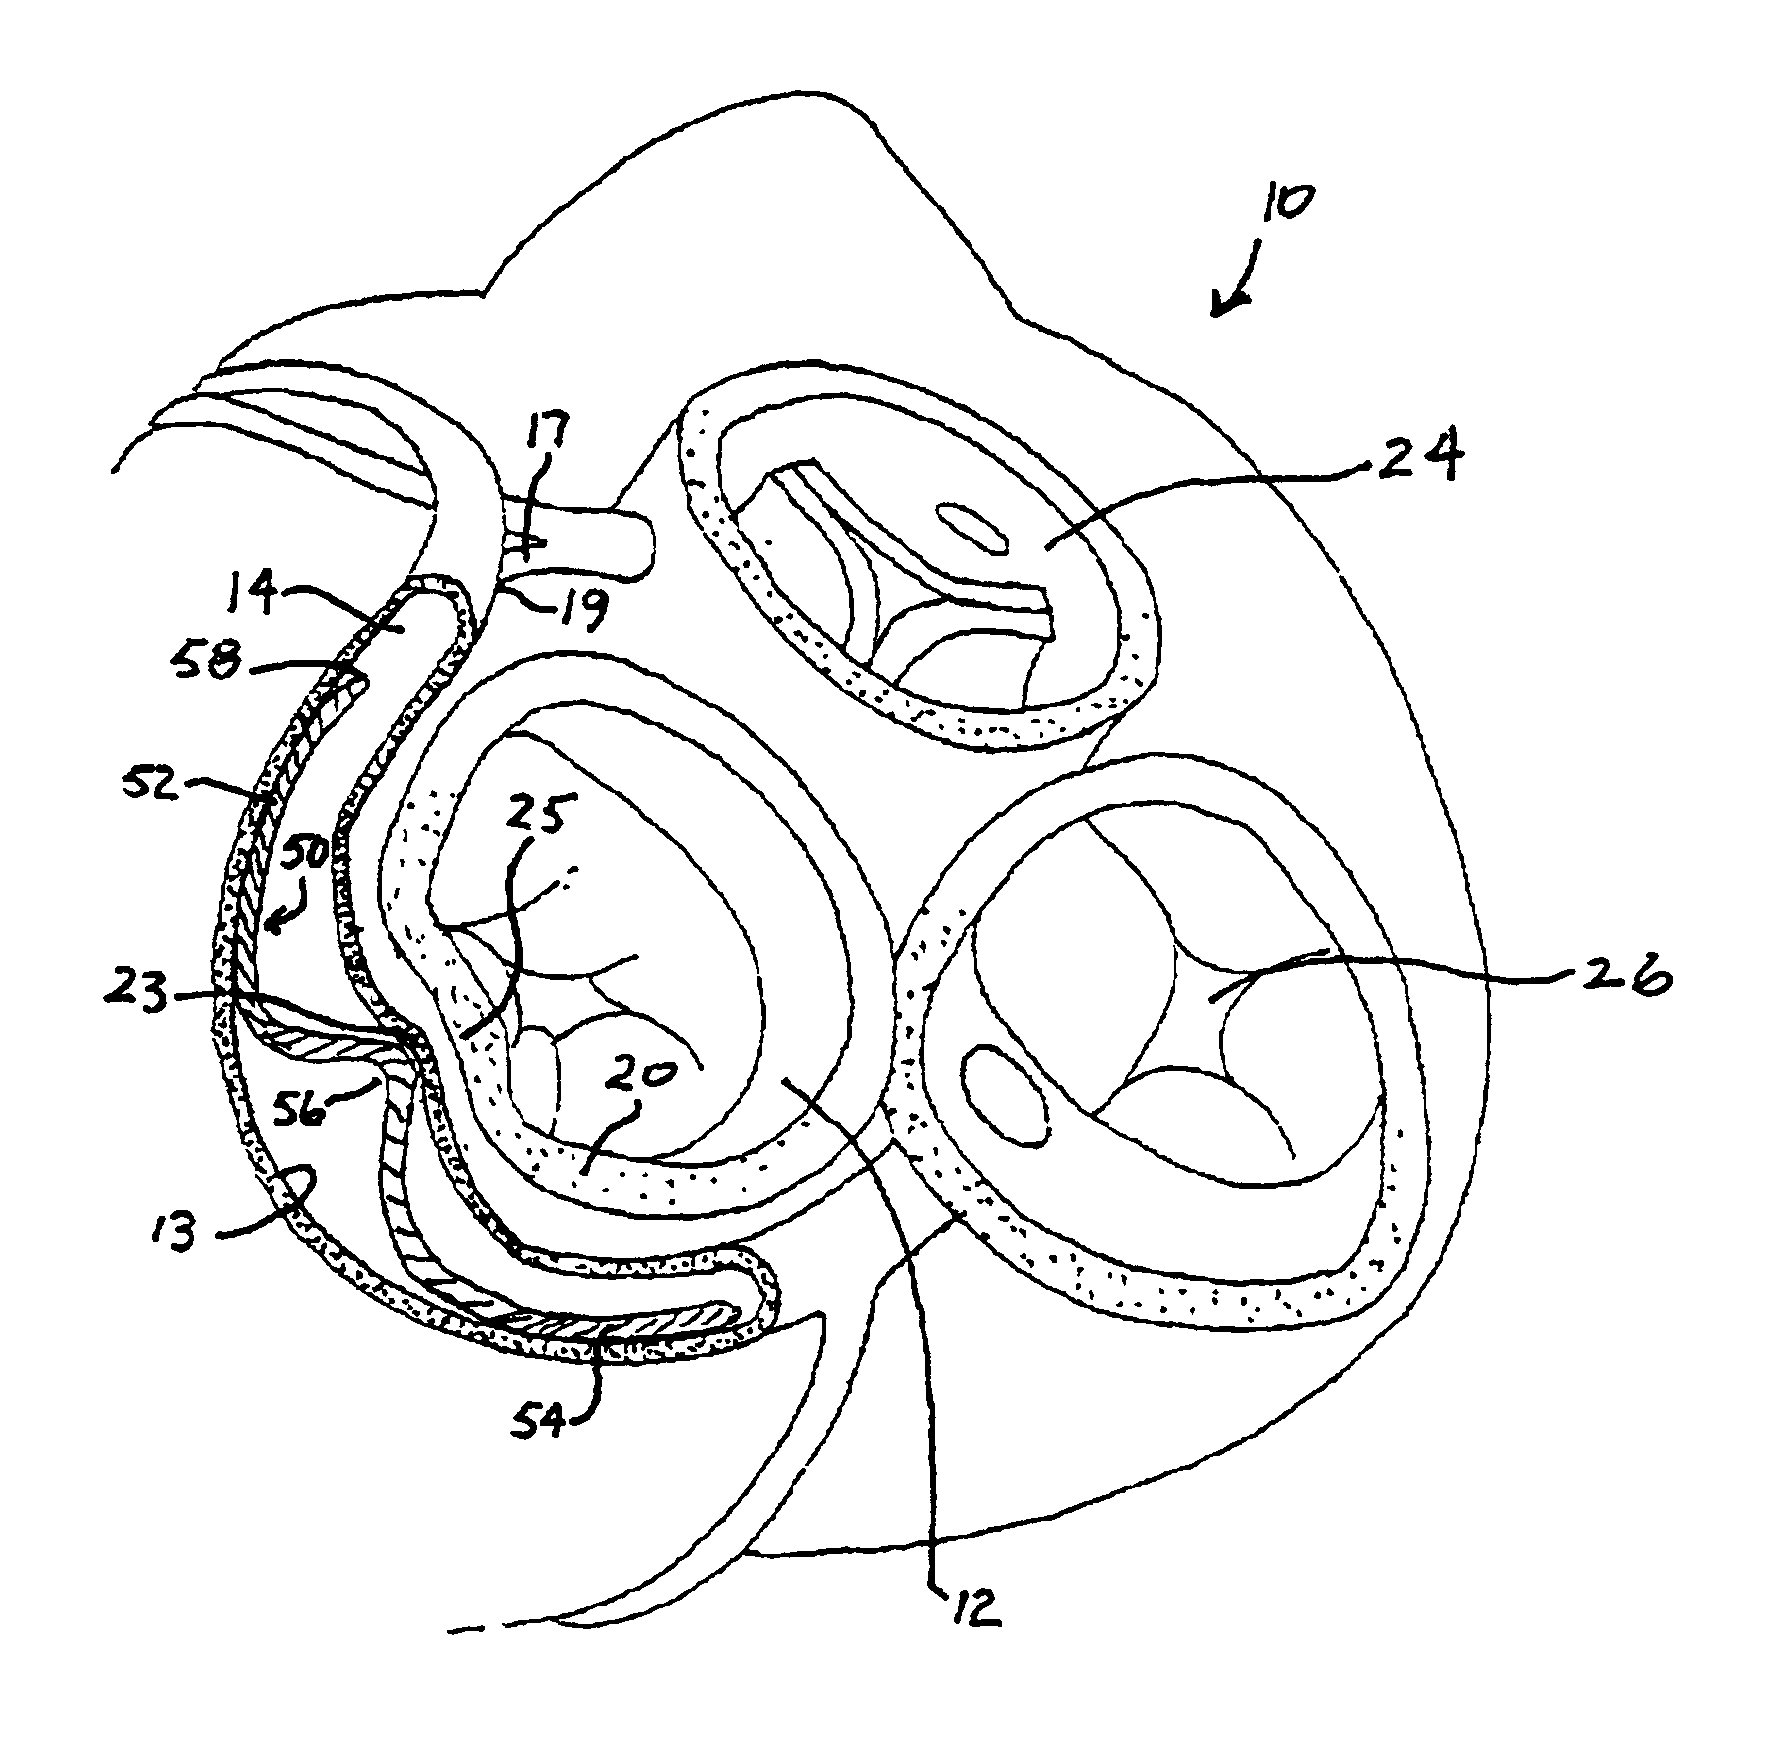 Focused compression mitral valve device and method